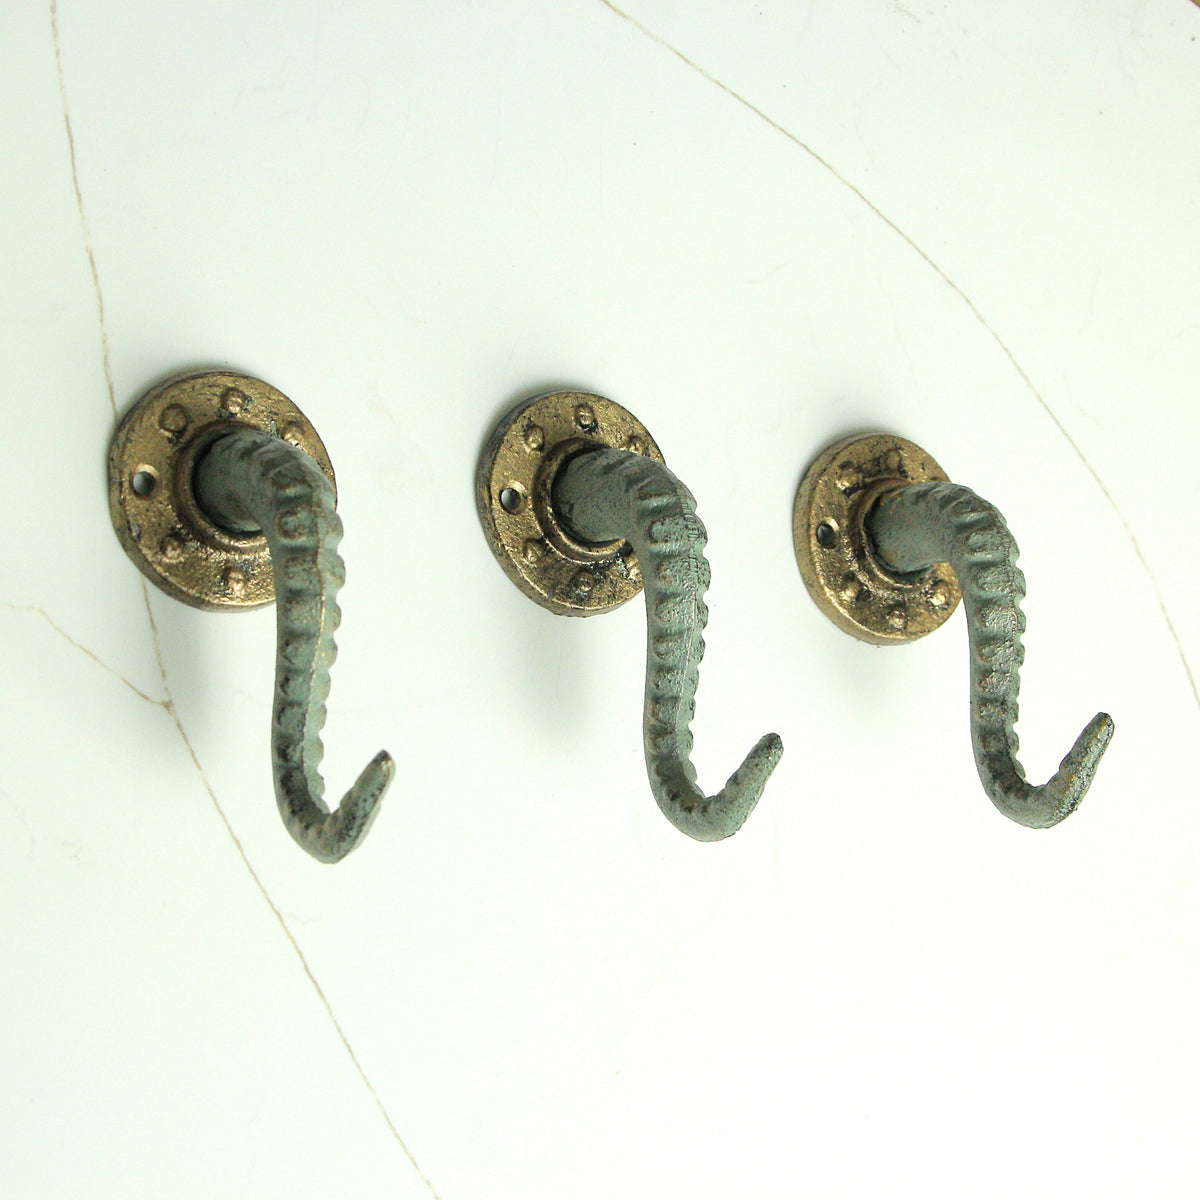 Tentacle wall hook by GamesAndToys64